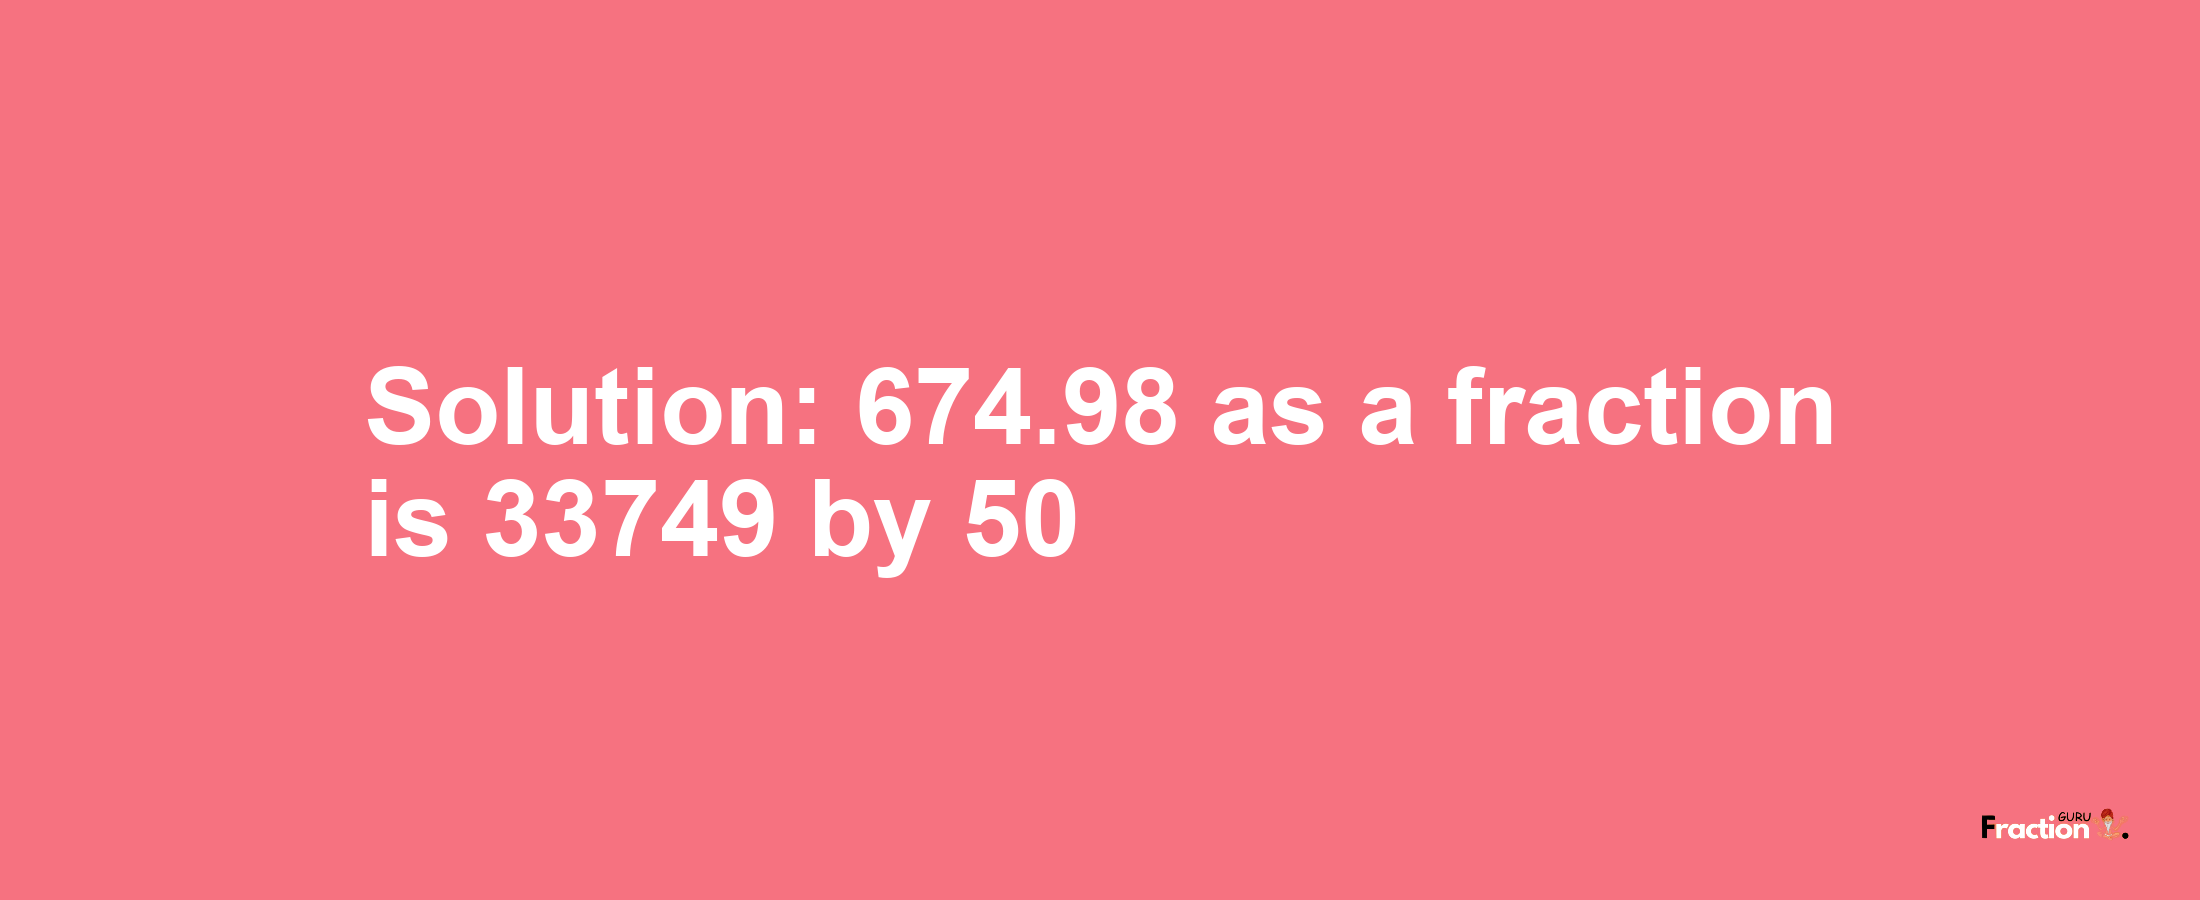 Solution:674.98 as a fraction is 33749/50